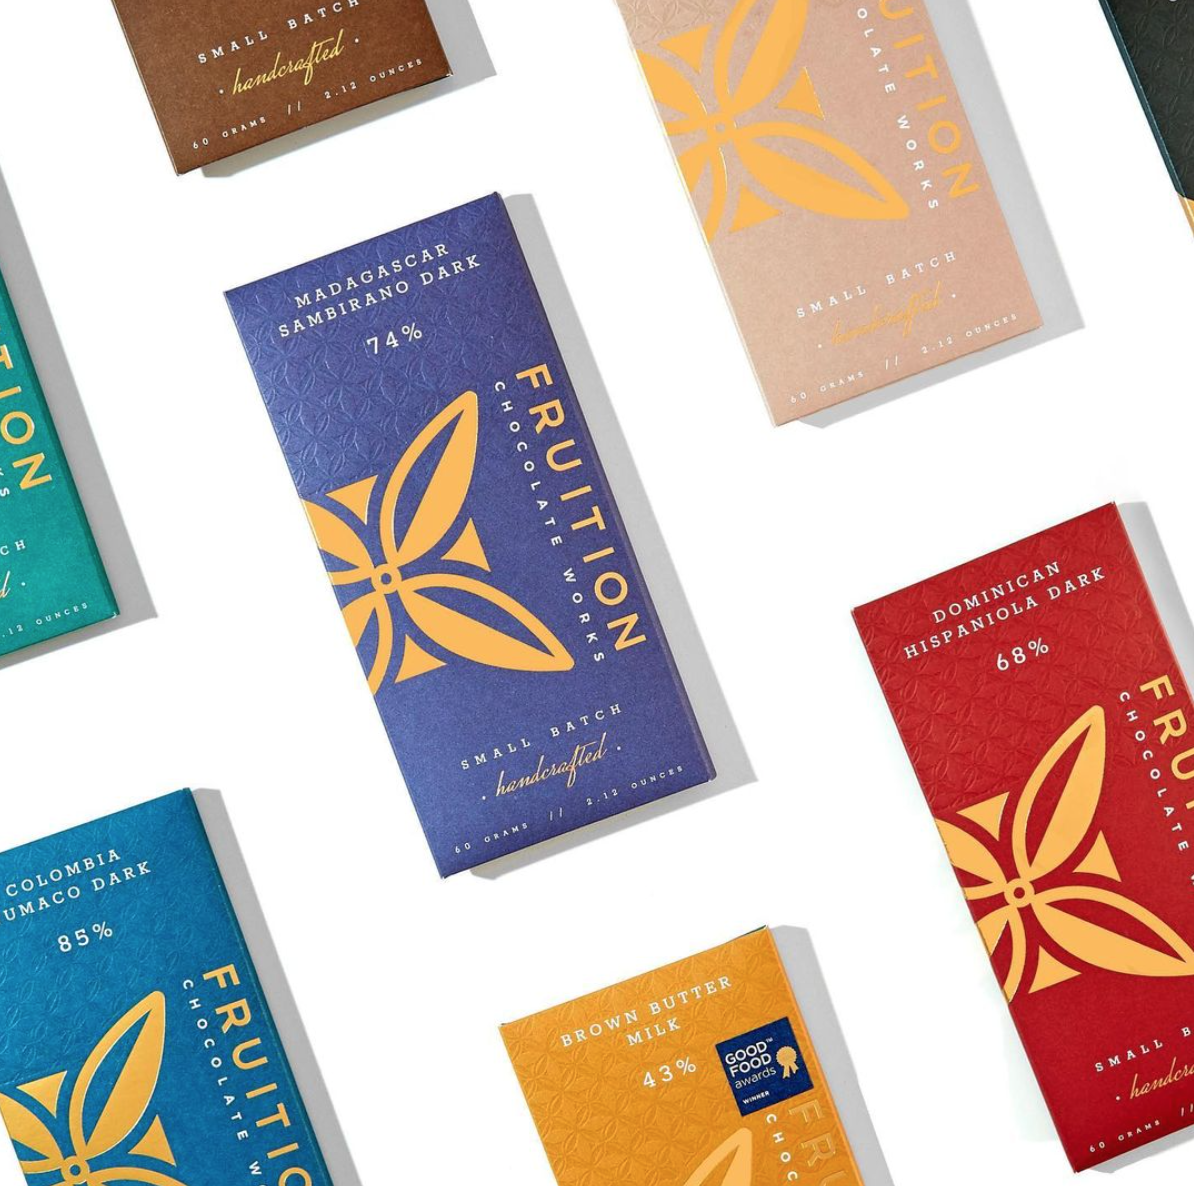 Fruition Chocolate - Ethical Chocolate Companies